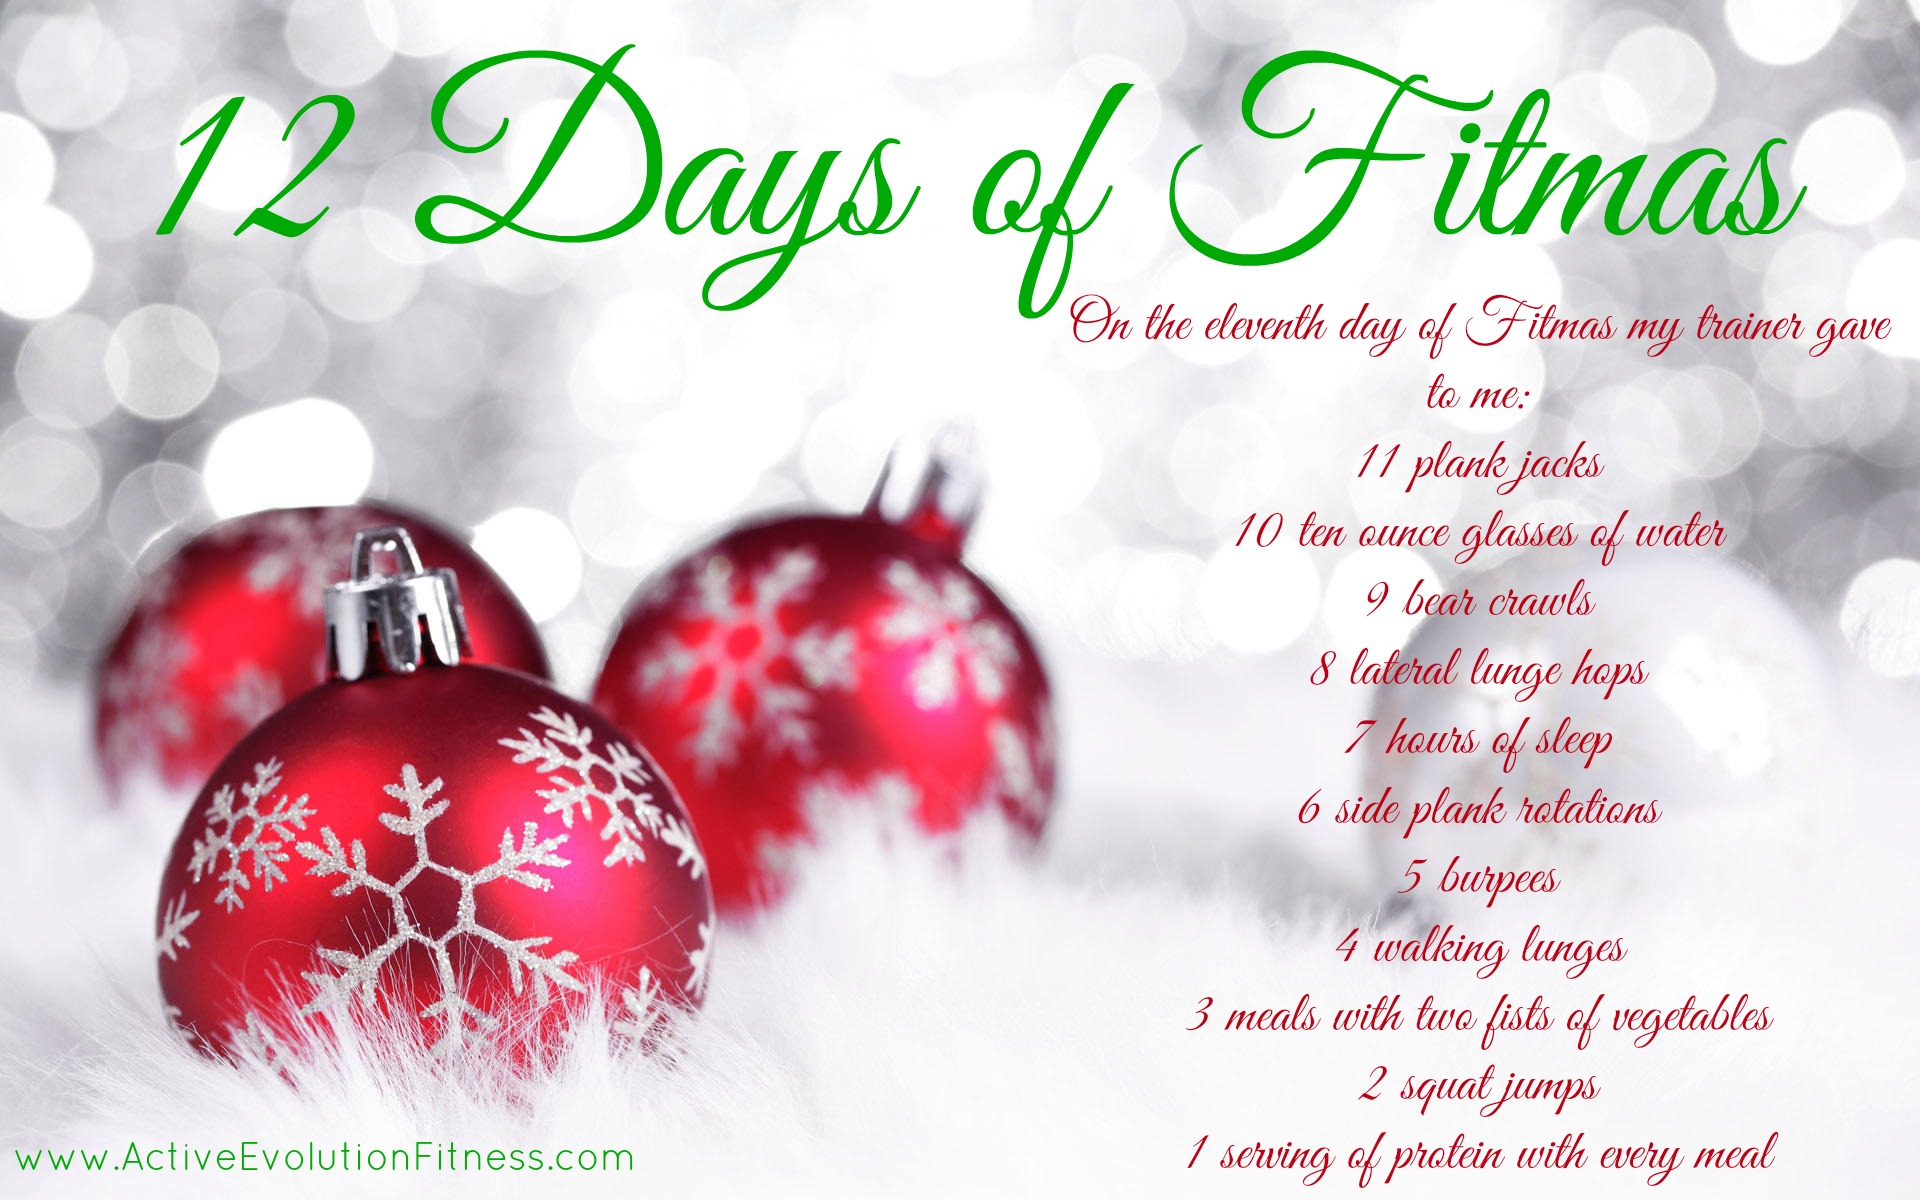 Fitmas - Day 11